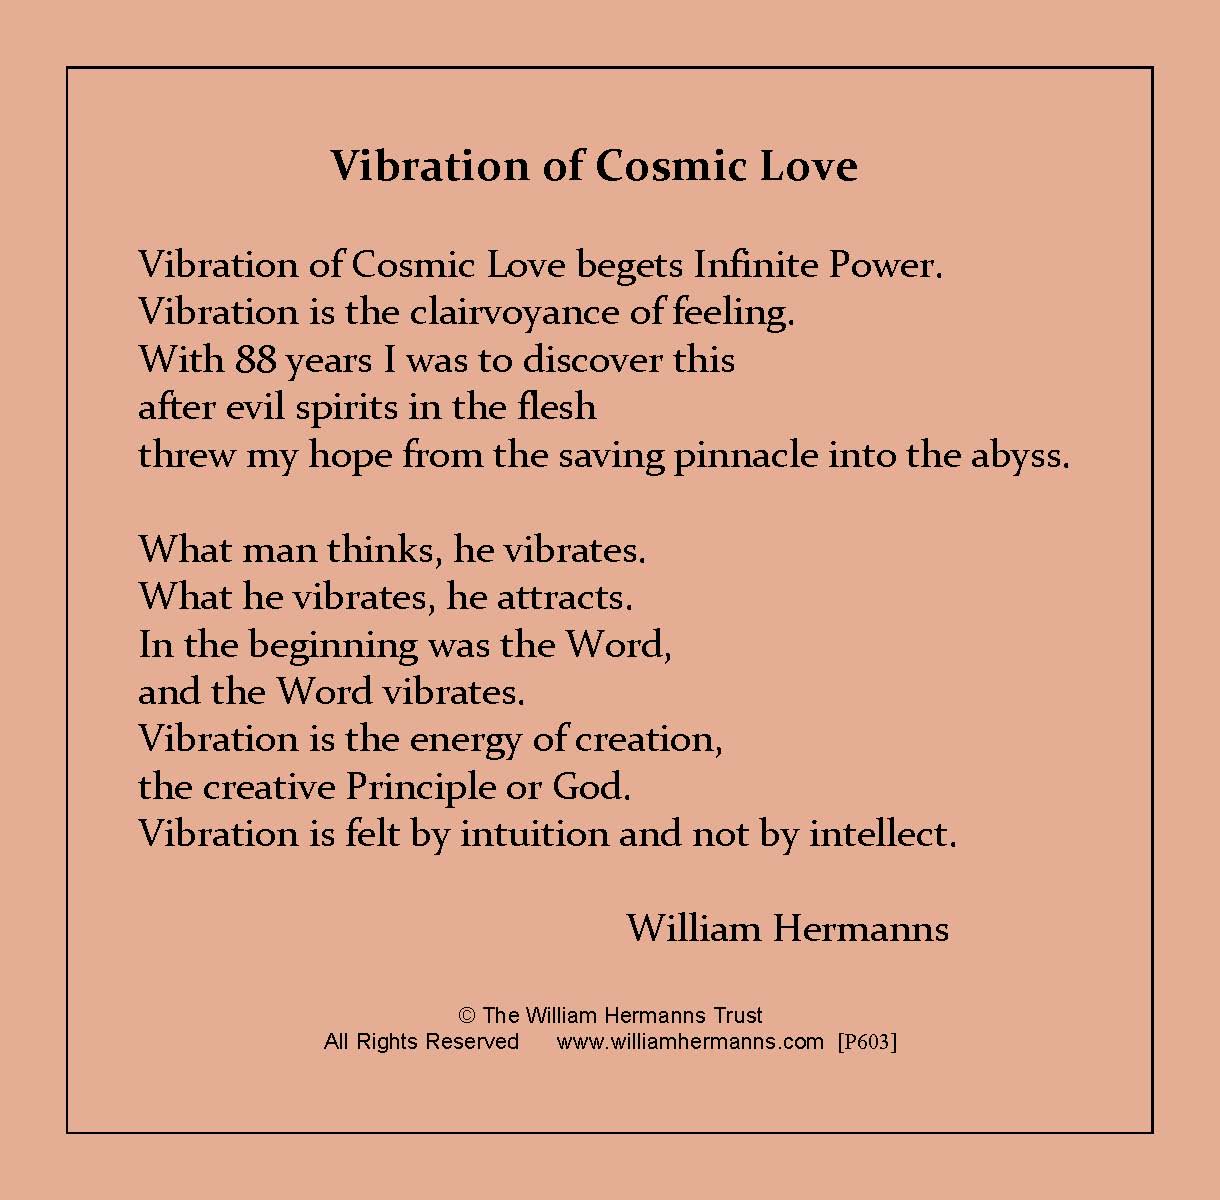 Vibrations of Cosmic Love by William Hermanns